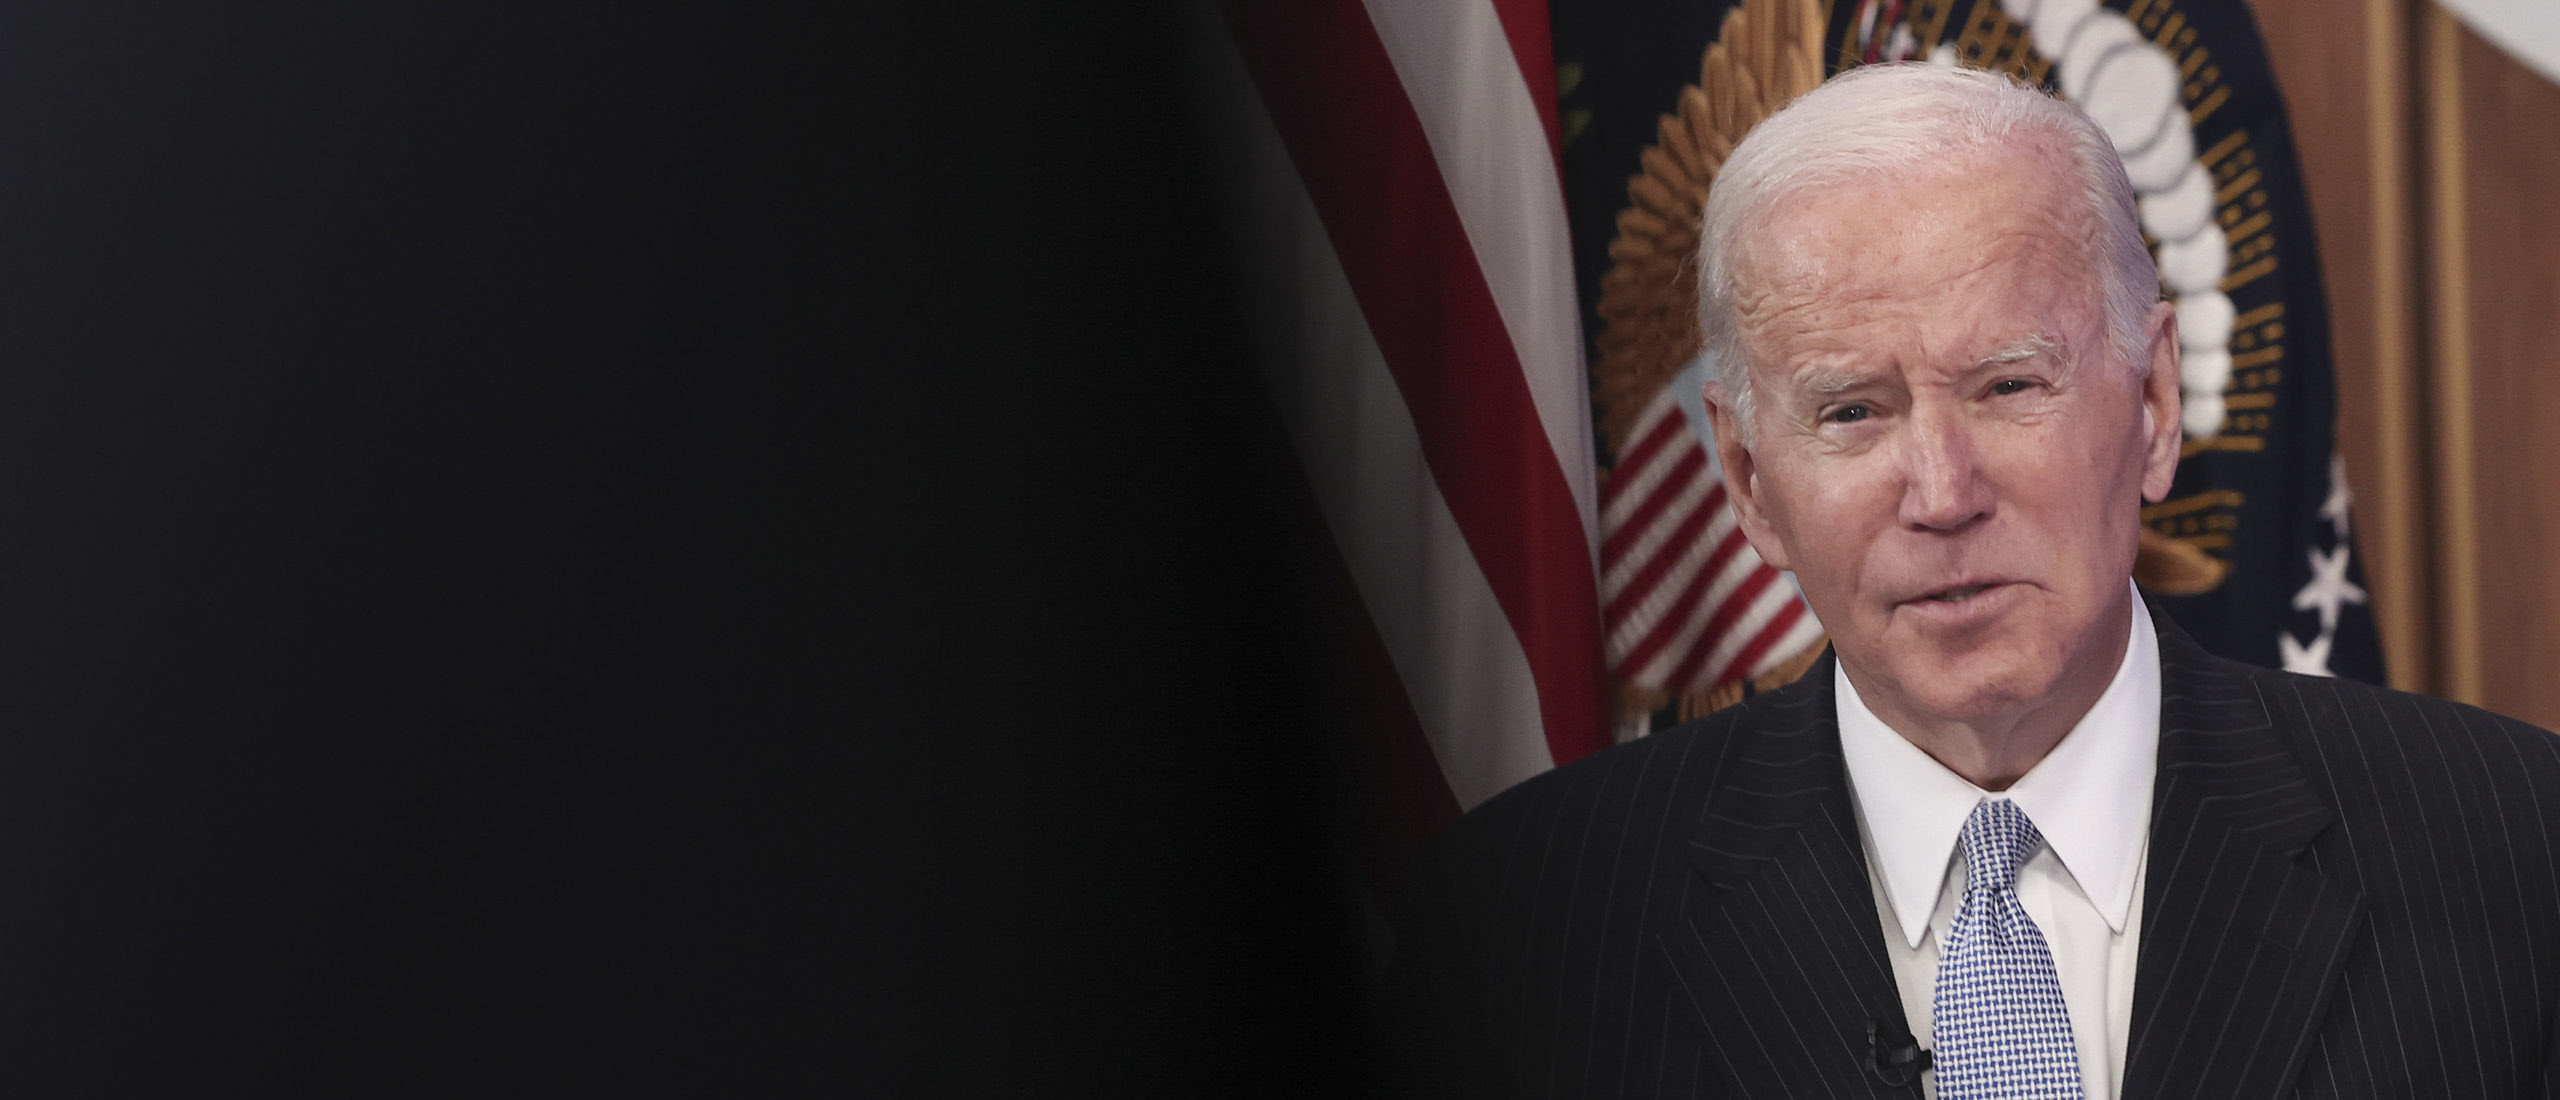 Watchdog Group Sues Biden’s DHS For Records On Alleged Coordination To Censor Americans